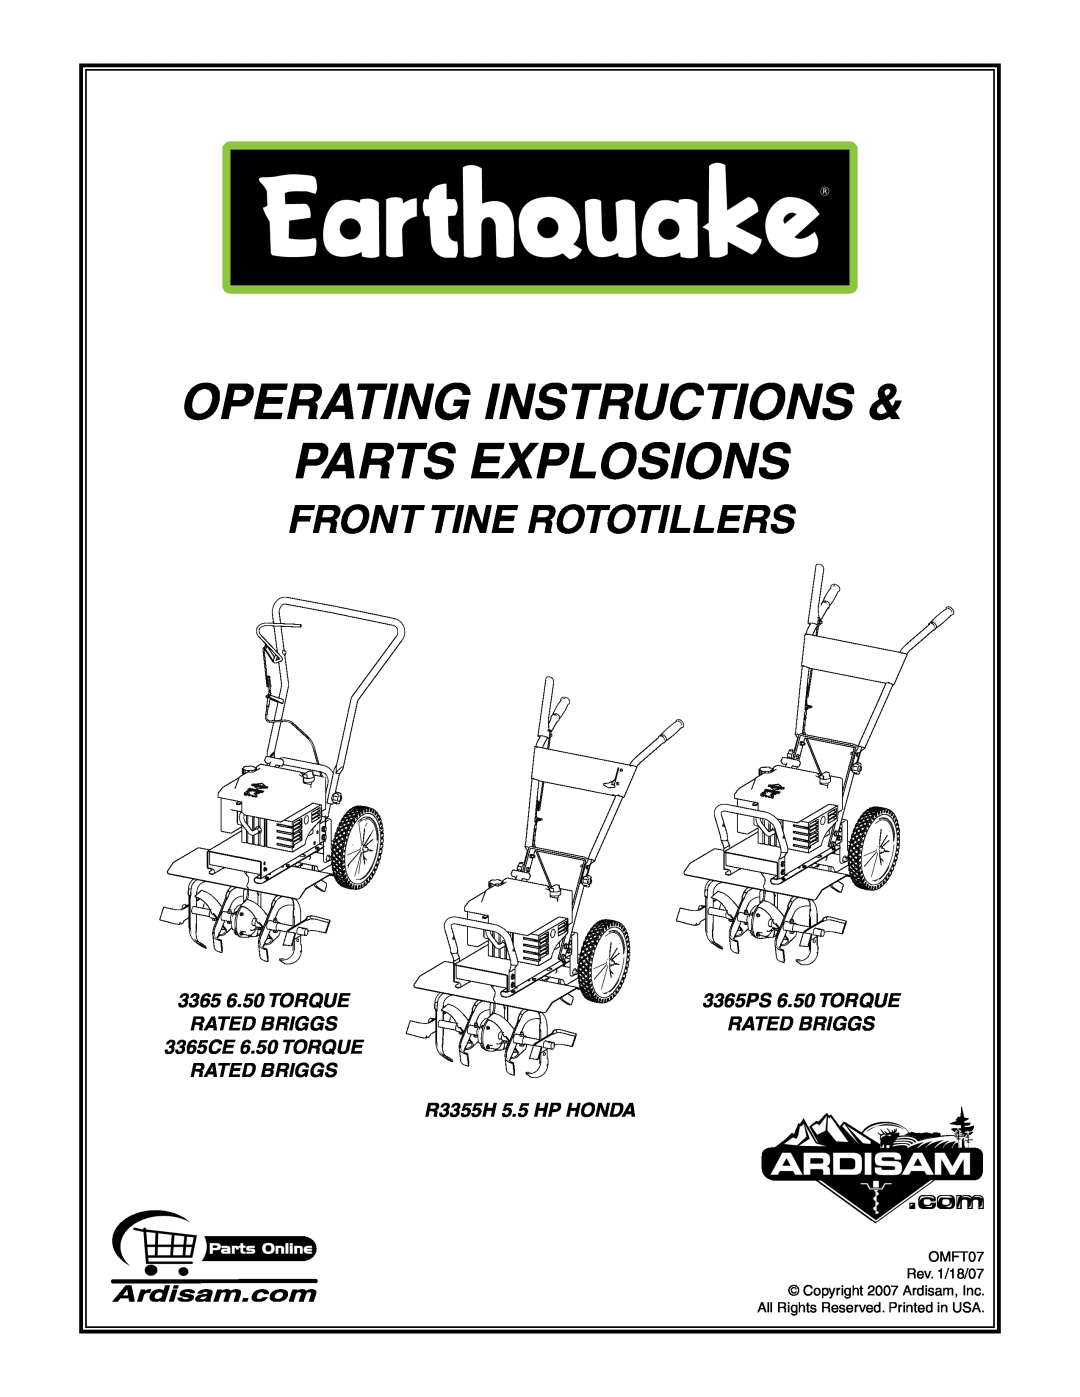 Earthquake Sound ROTOTILLERS operating instructions Parts EXPLOSIONS, Operating Instructions, FRONT TINE ROTOTILLERs 